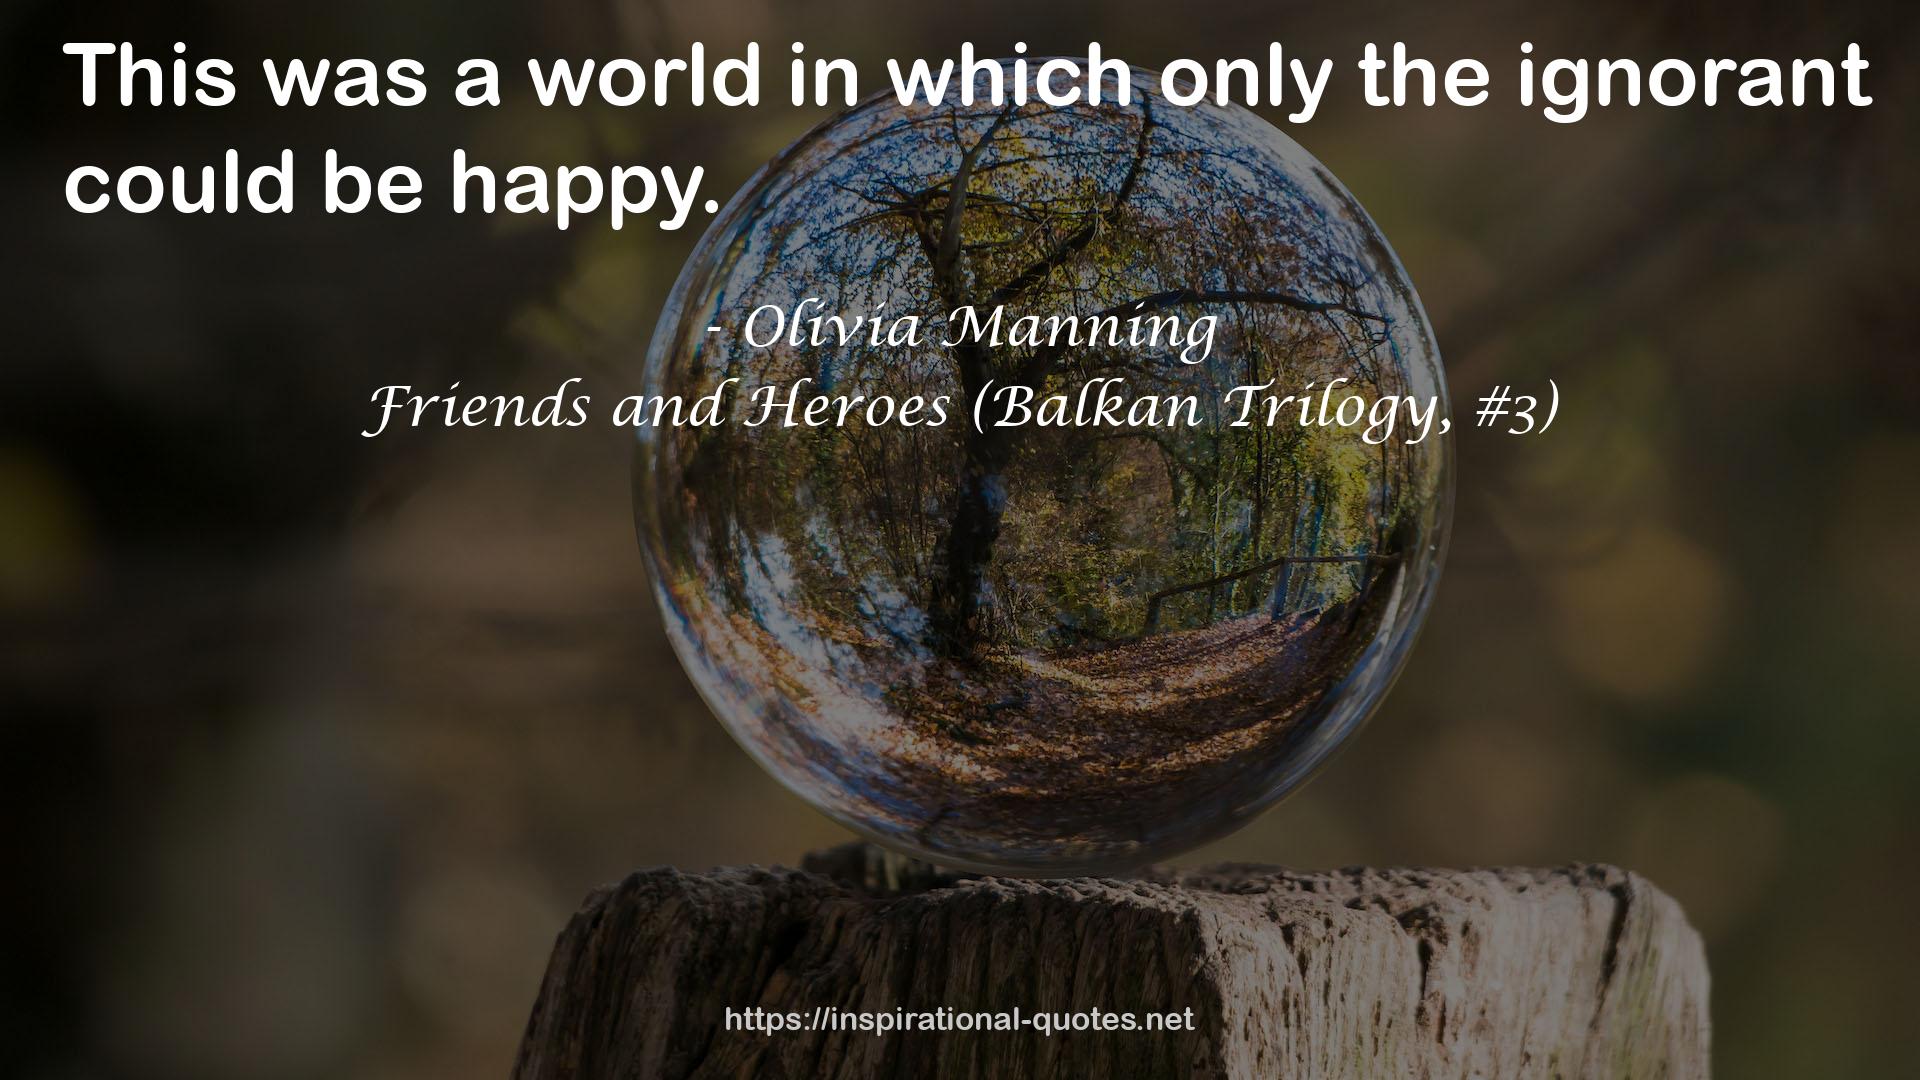 Friends and Heroes (Balkan Trilogy, #3) QUOTES